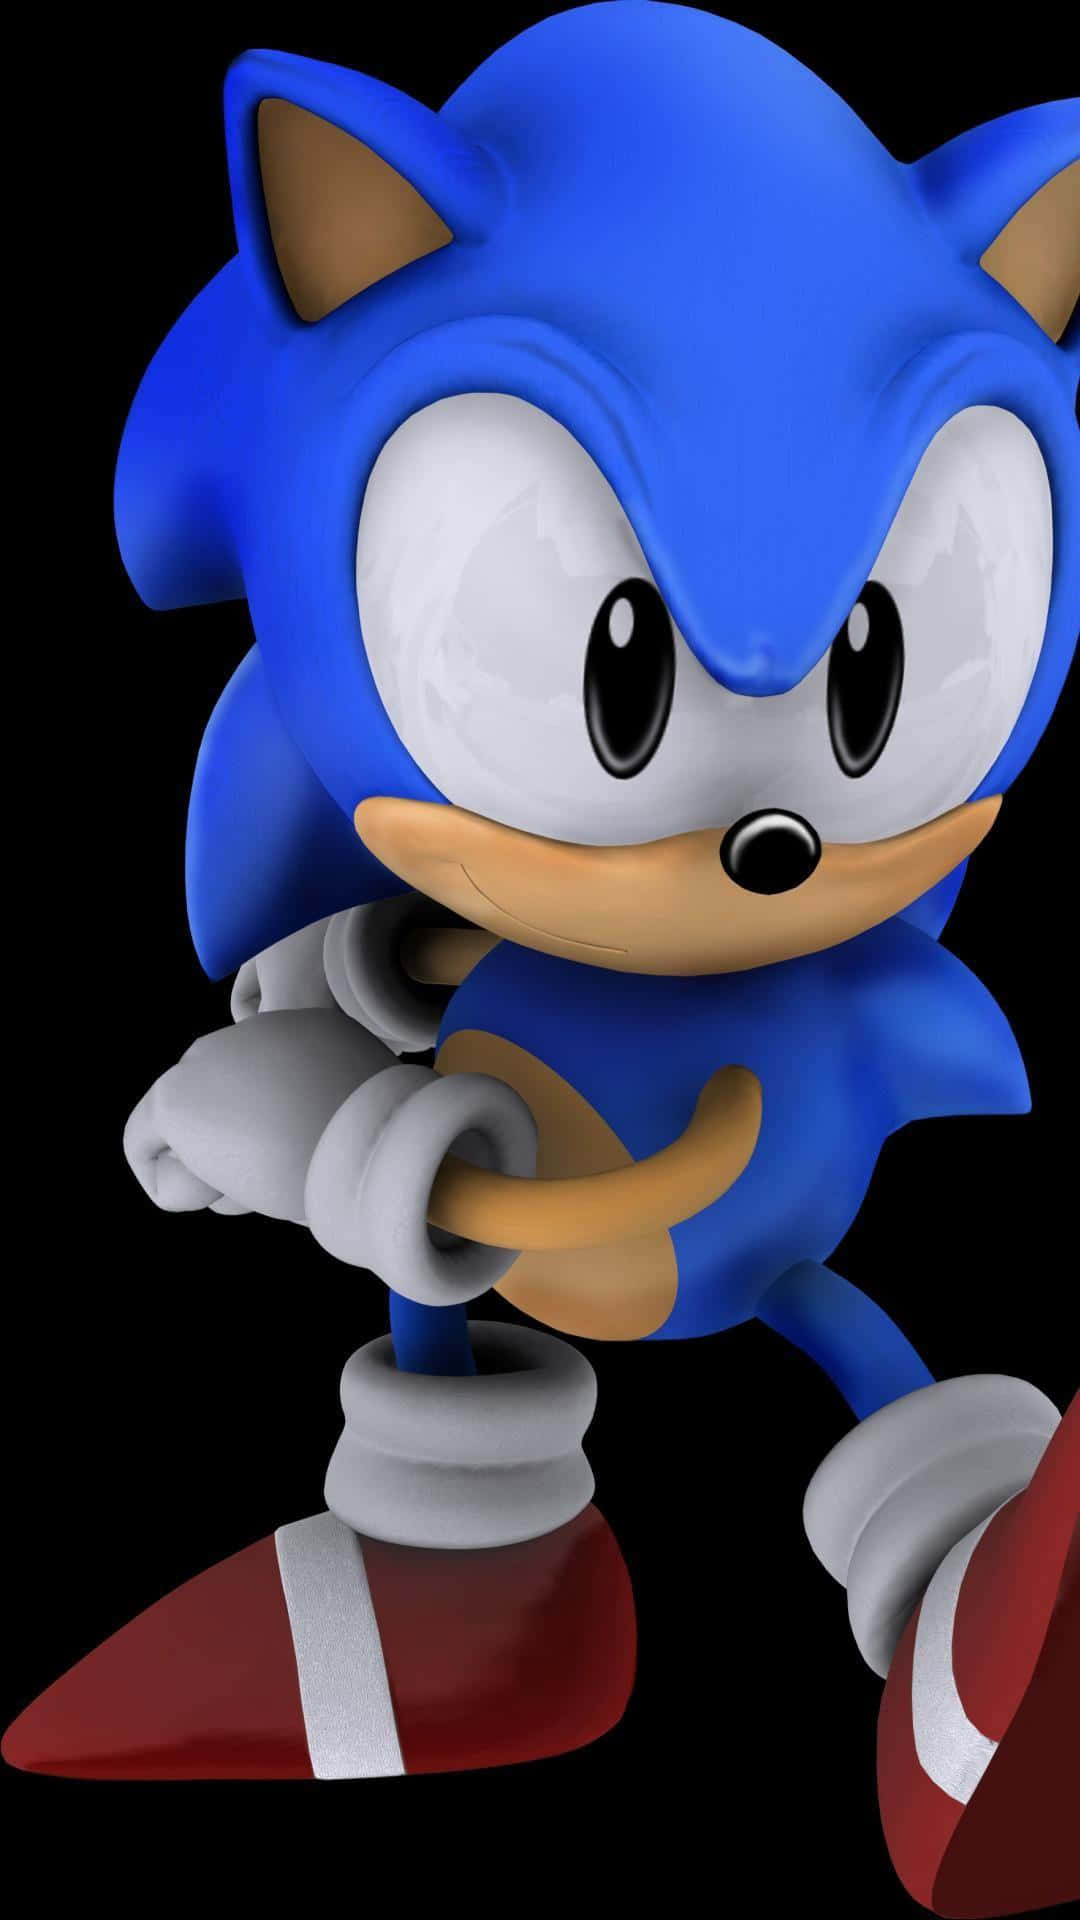 The One and Only – Classic Sonic